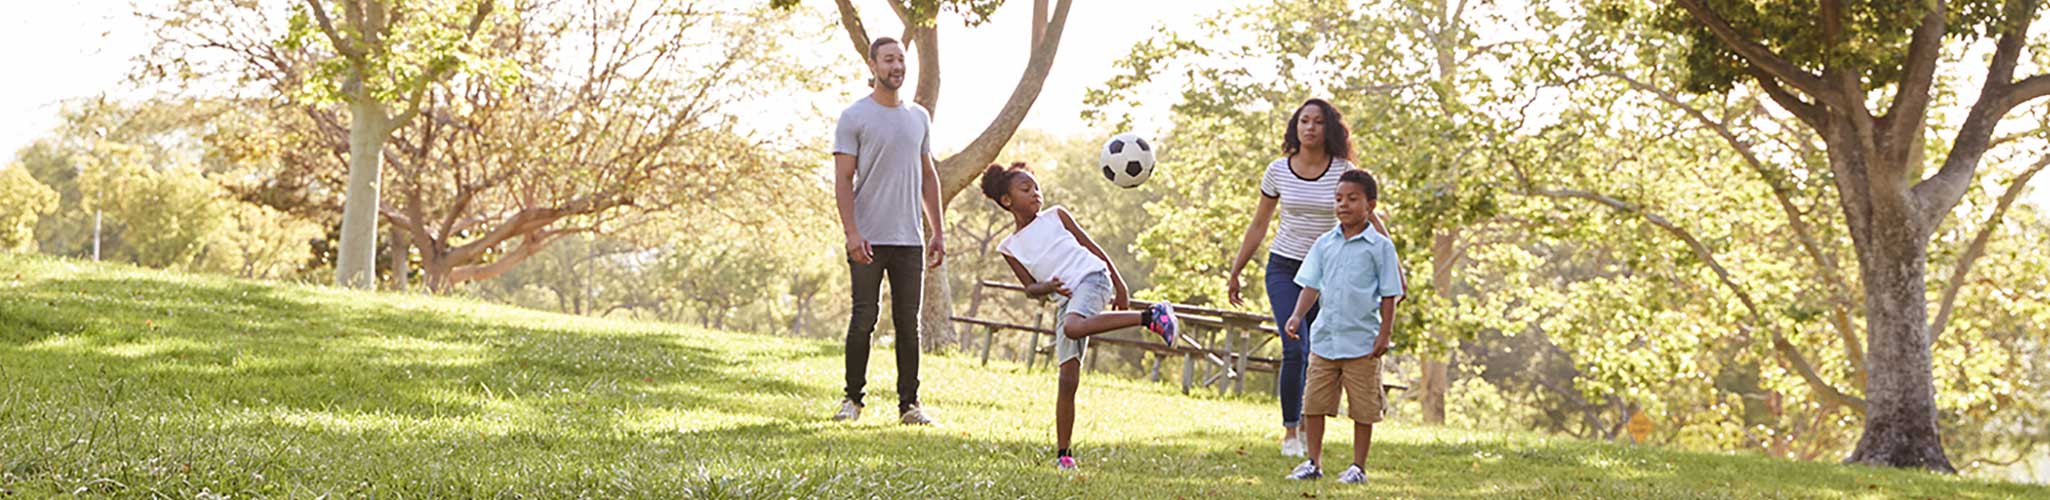 Young family playing soccer in a park.